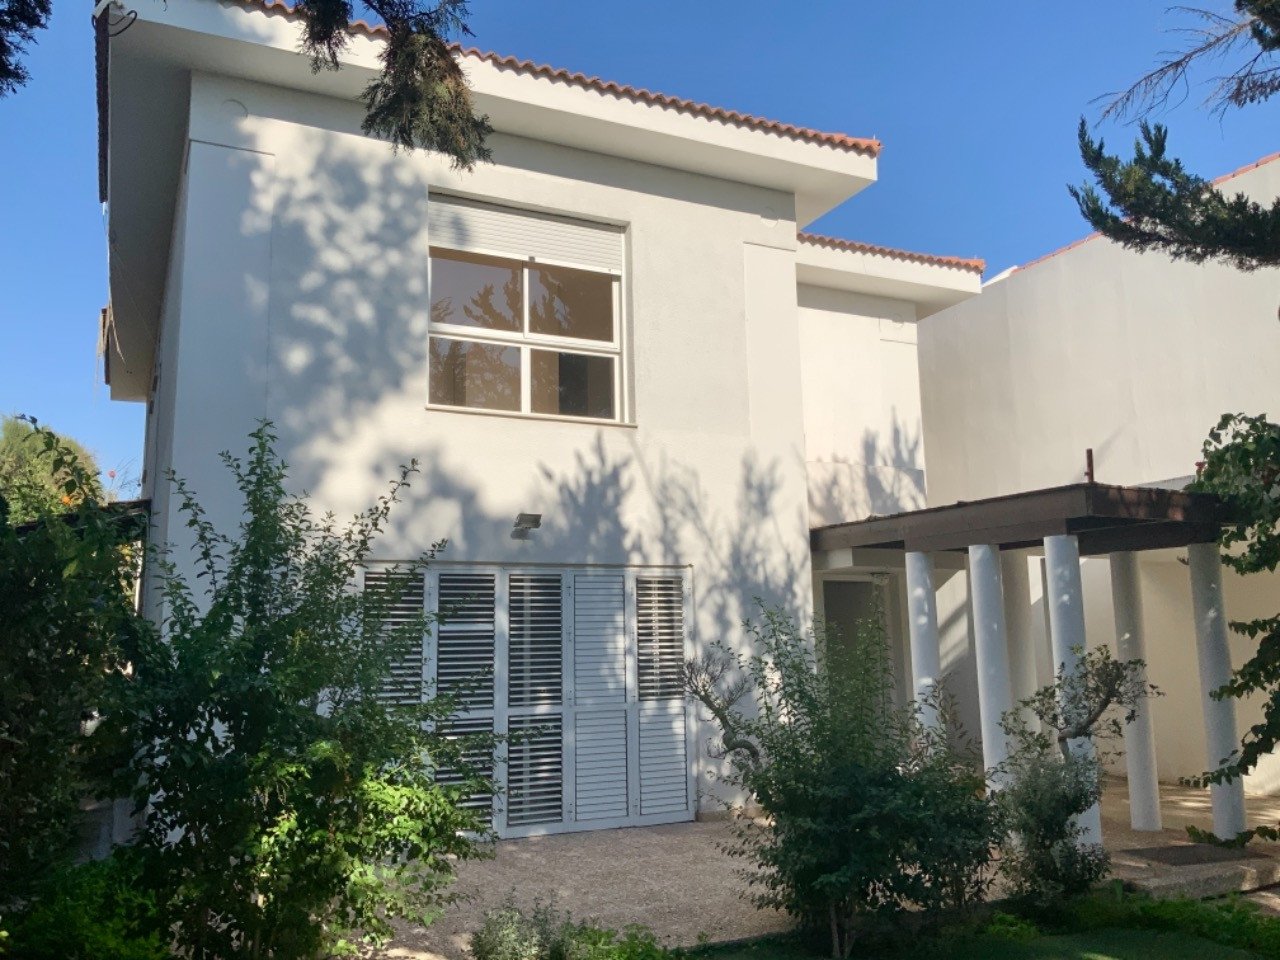 Property for Rent: House (Detached) in Engomi, Nicosia for Rent | Key Realtor Cyprus